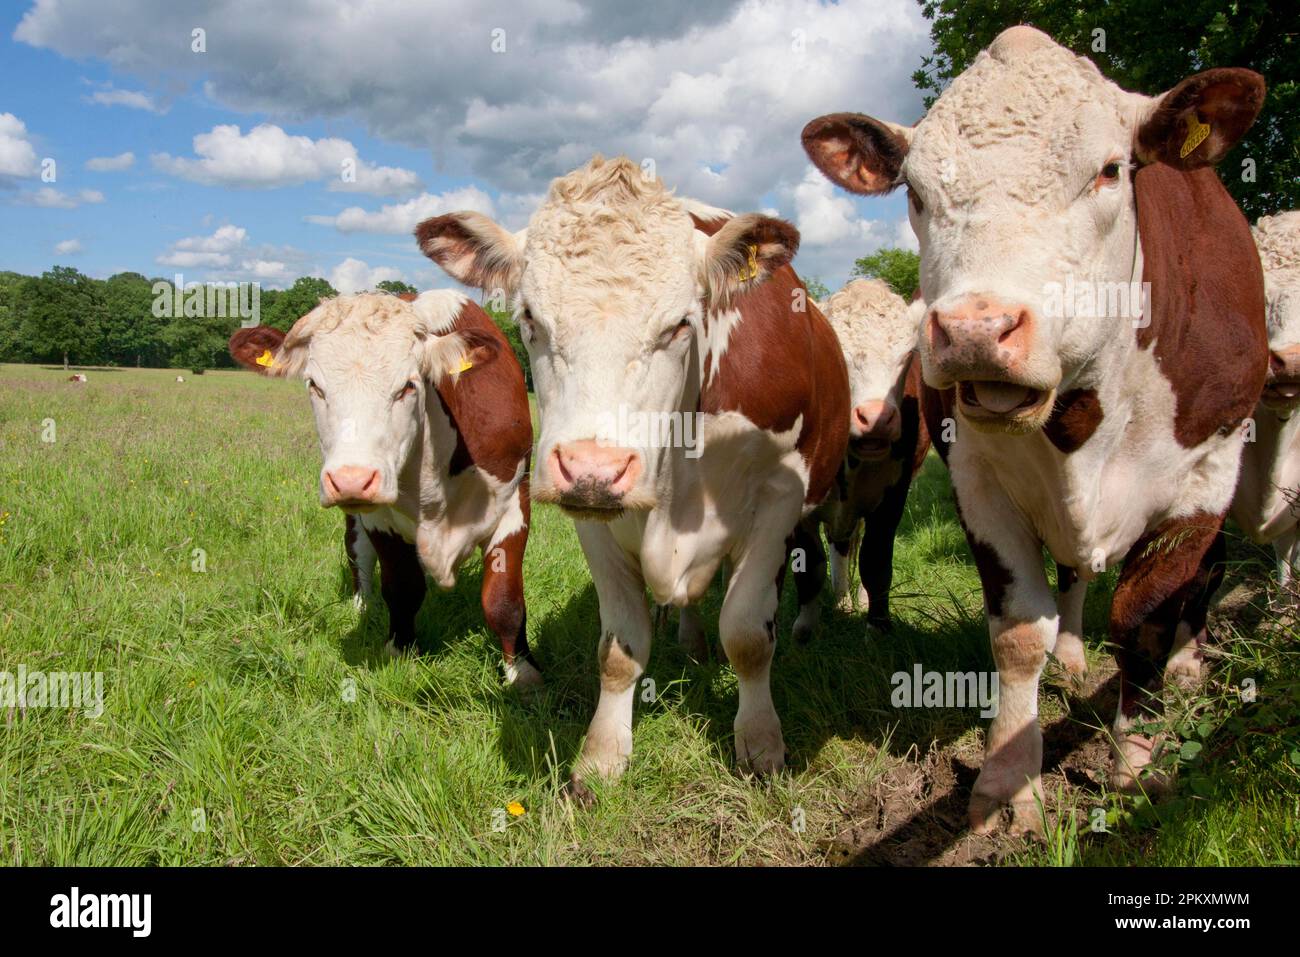 Domestic cattle, Hereford cows, herd standing on pasture, Dunsfold Rhys, High Street Green, Chiddingfold, Surrey, England, United Kingdom Stock Photo